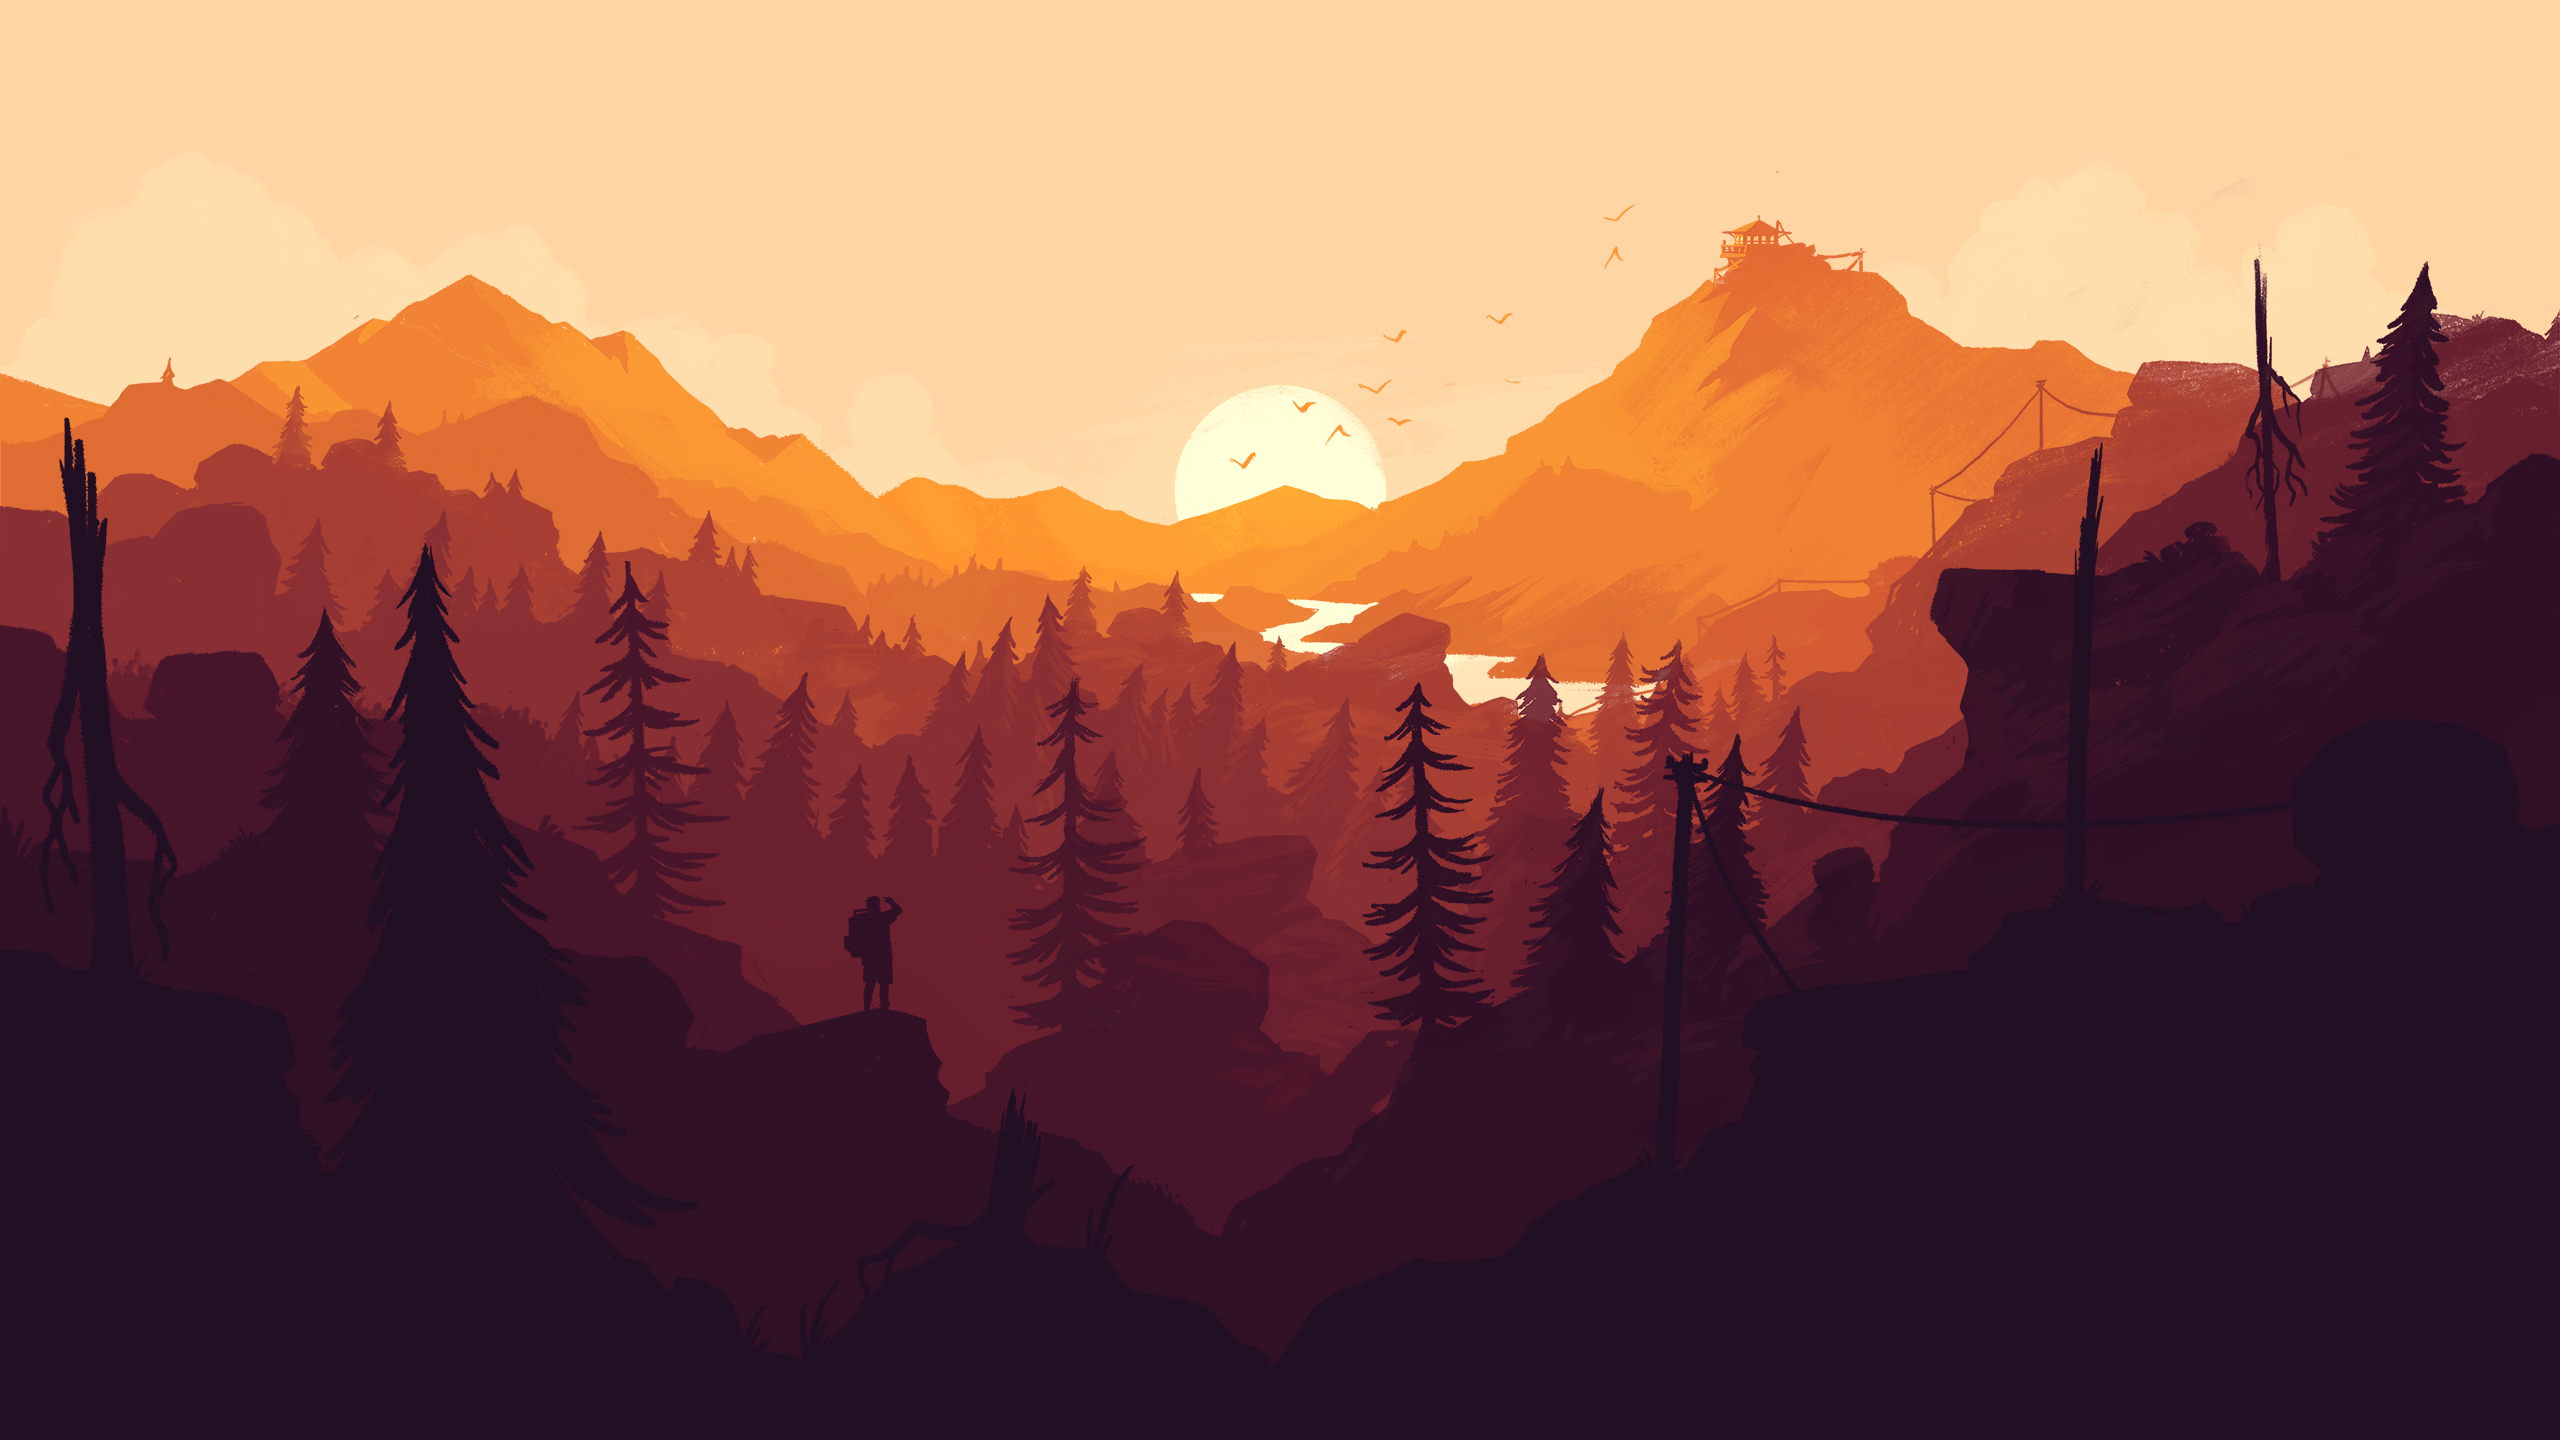 Landscape from the game "Firewatch"